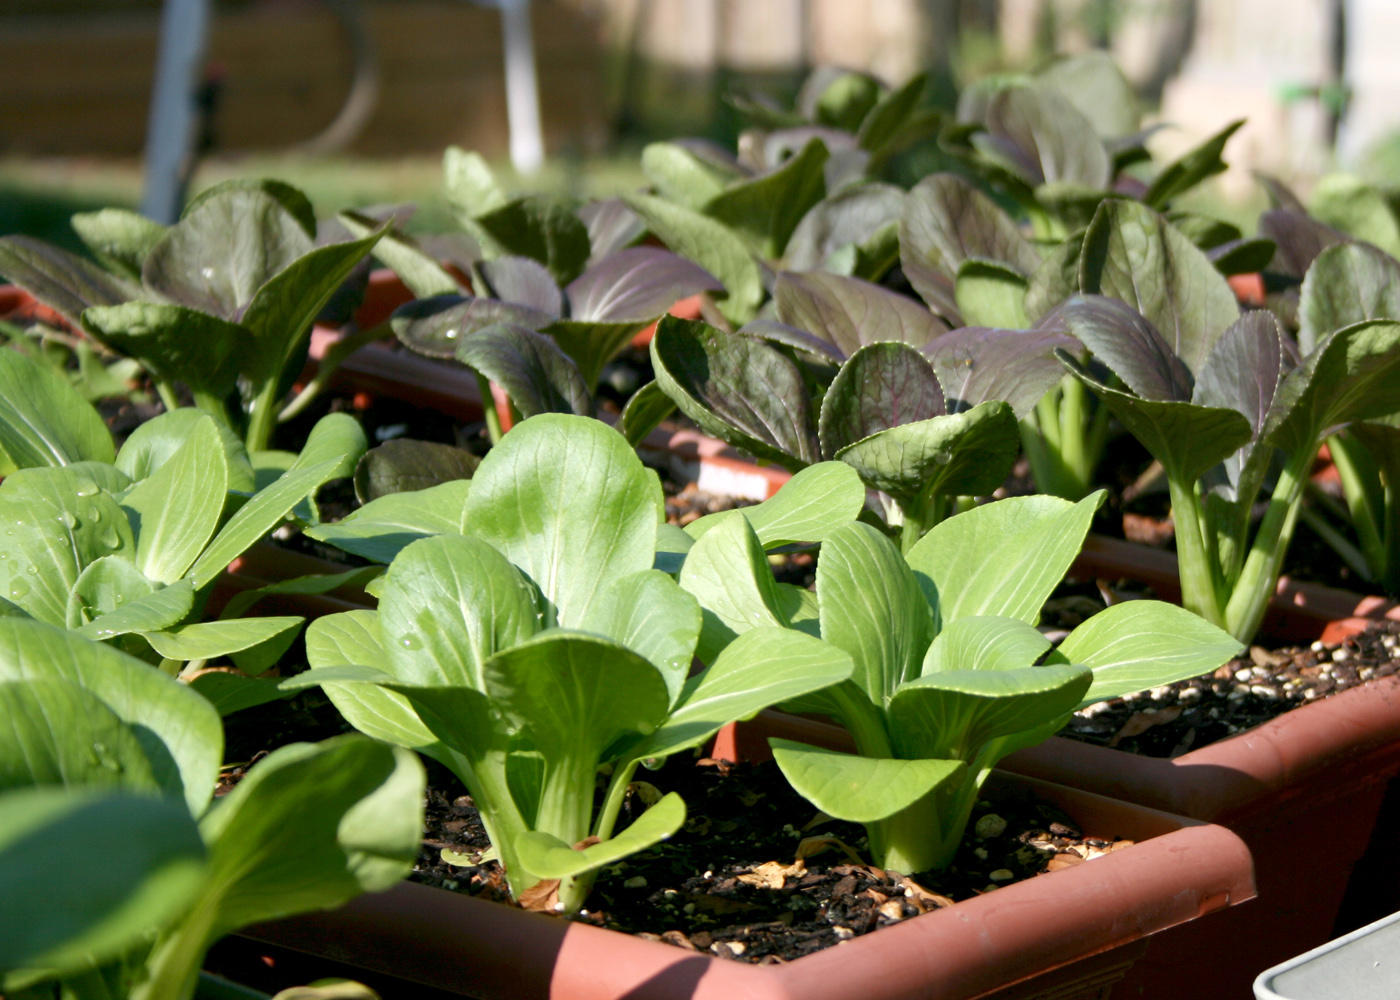 Miniature green bok choi plants grow in small window box containers.